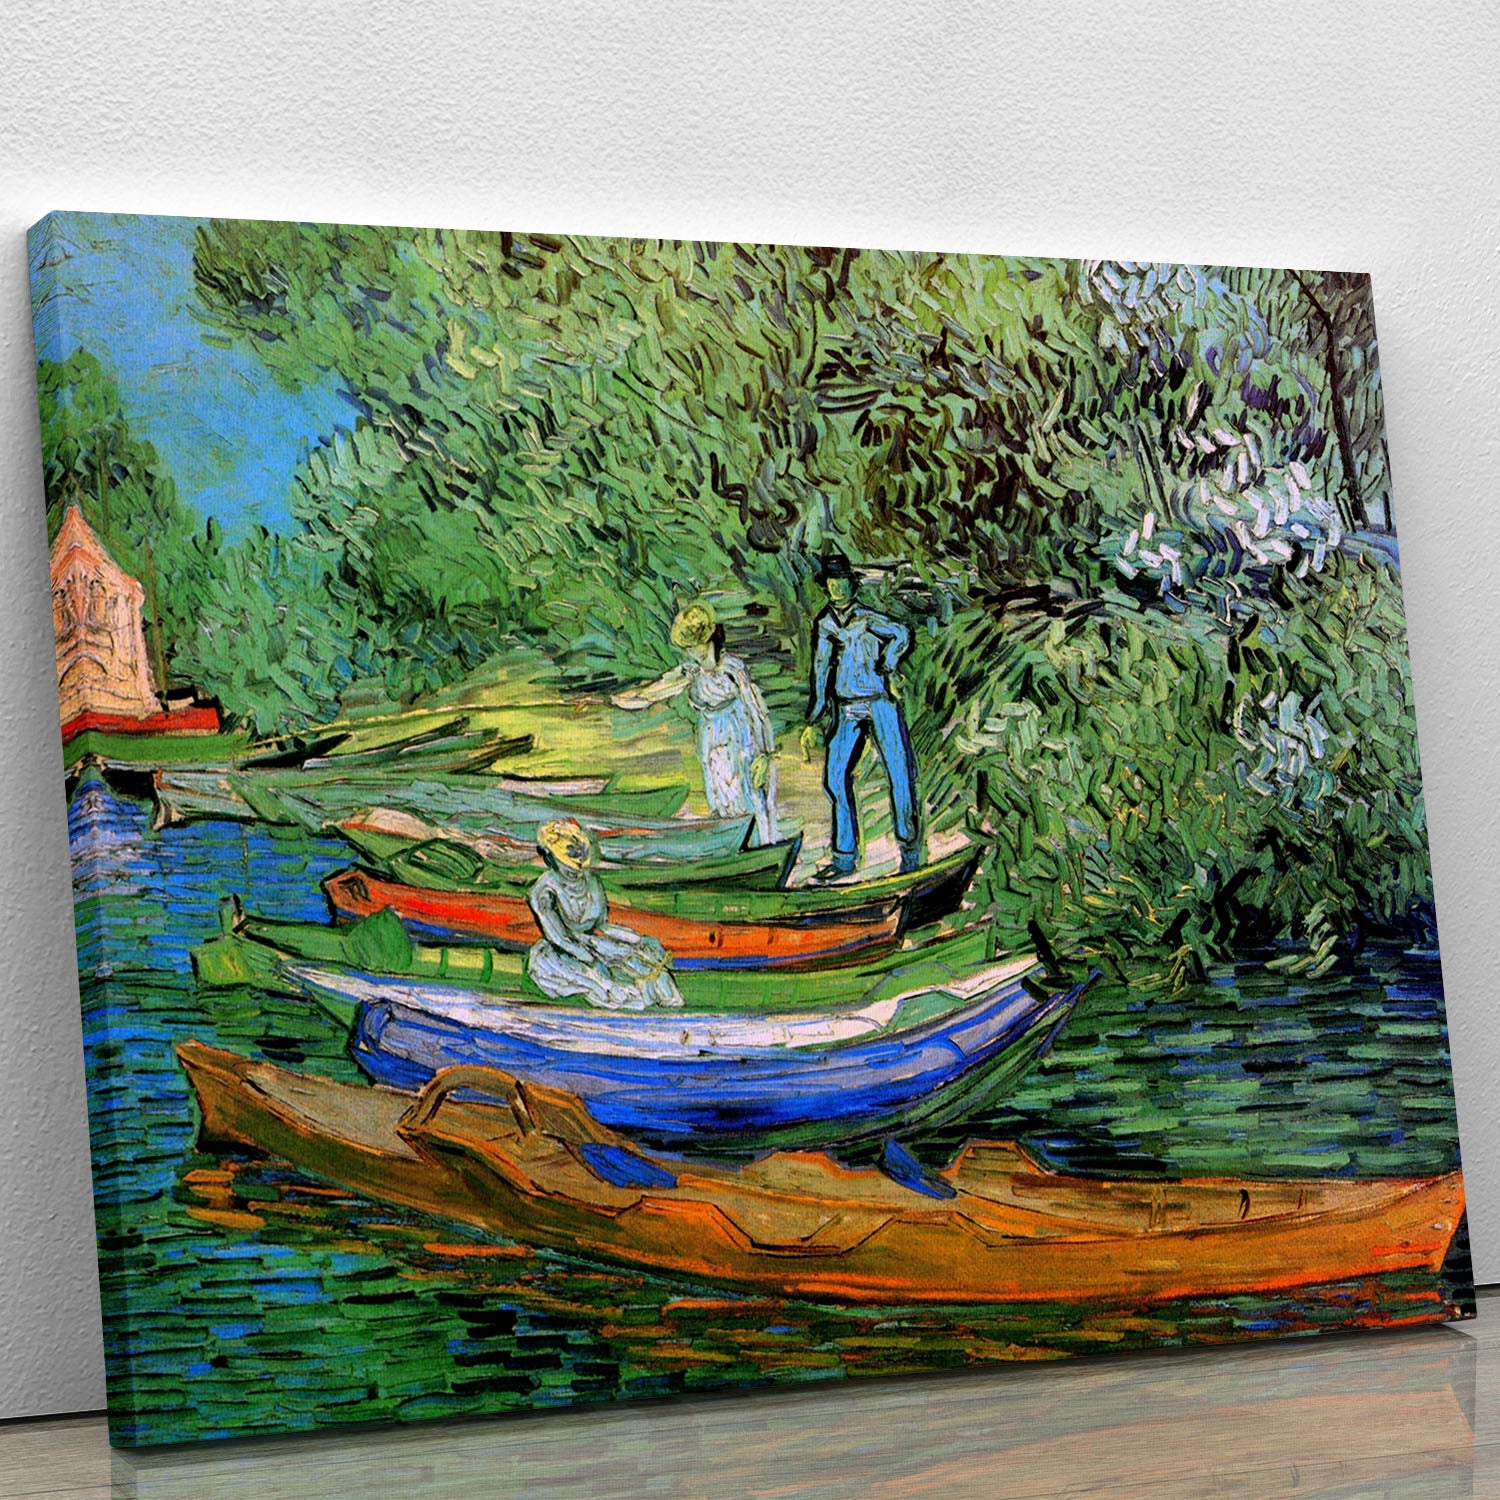 Bank of the Oise at Auvers by Van Gogh Canvas Print or Poster - Canvas Art Rocks - 1